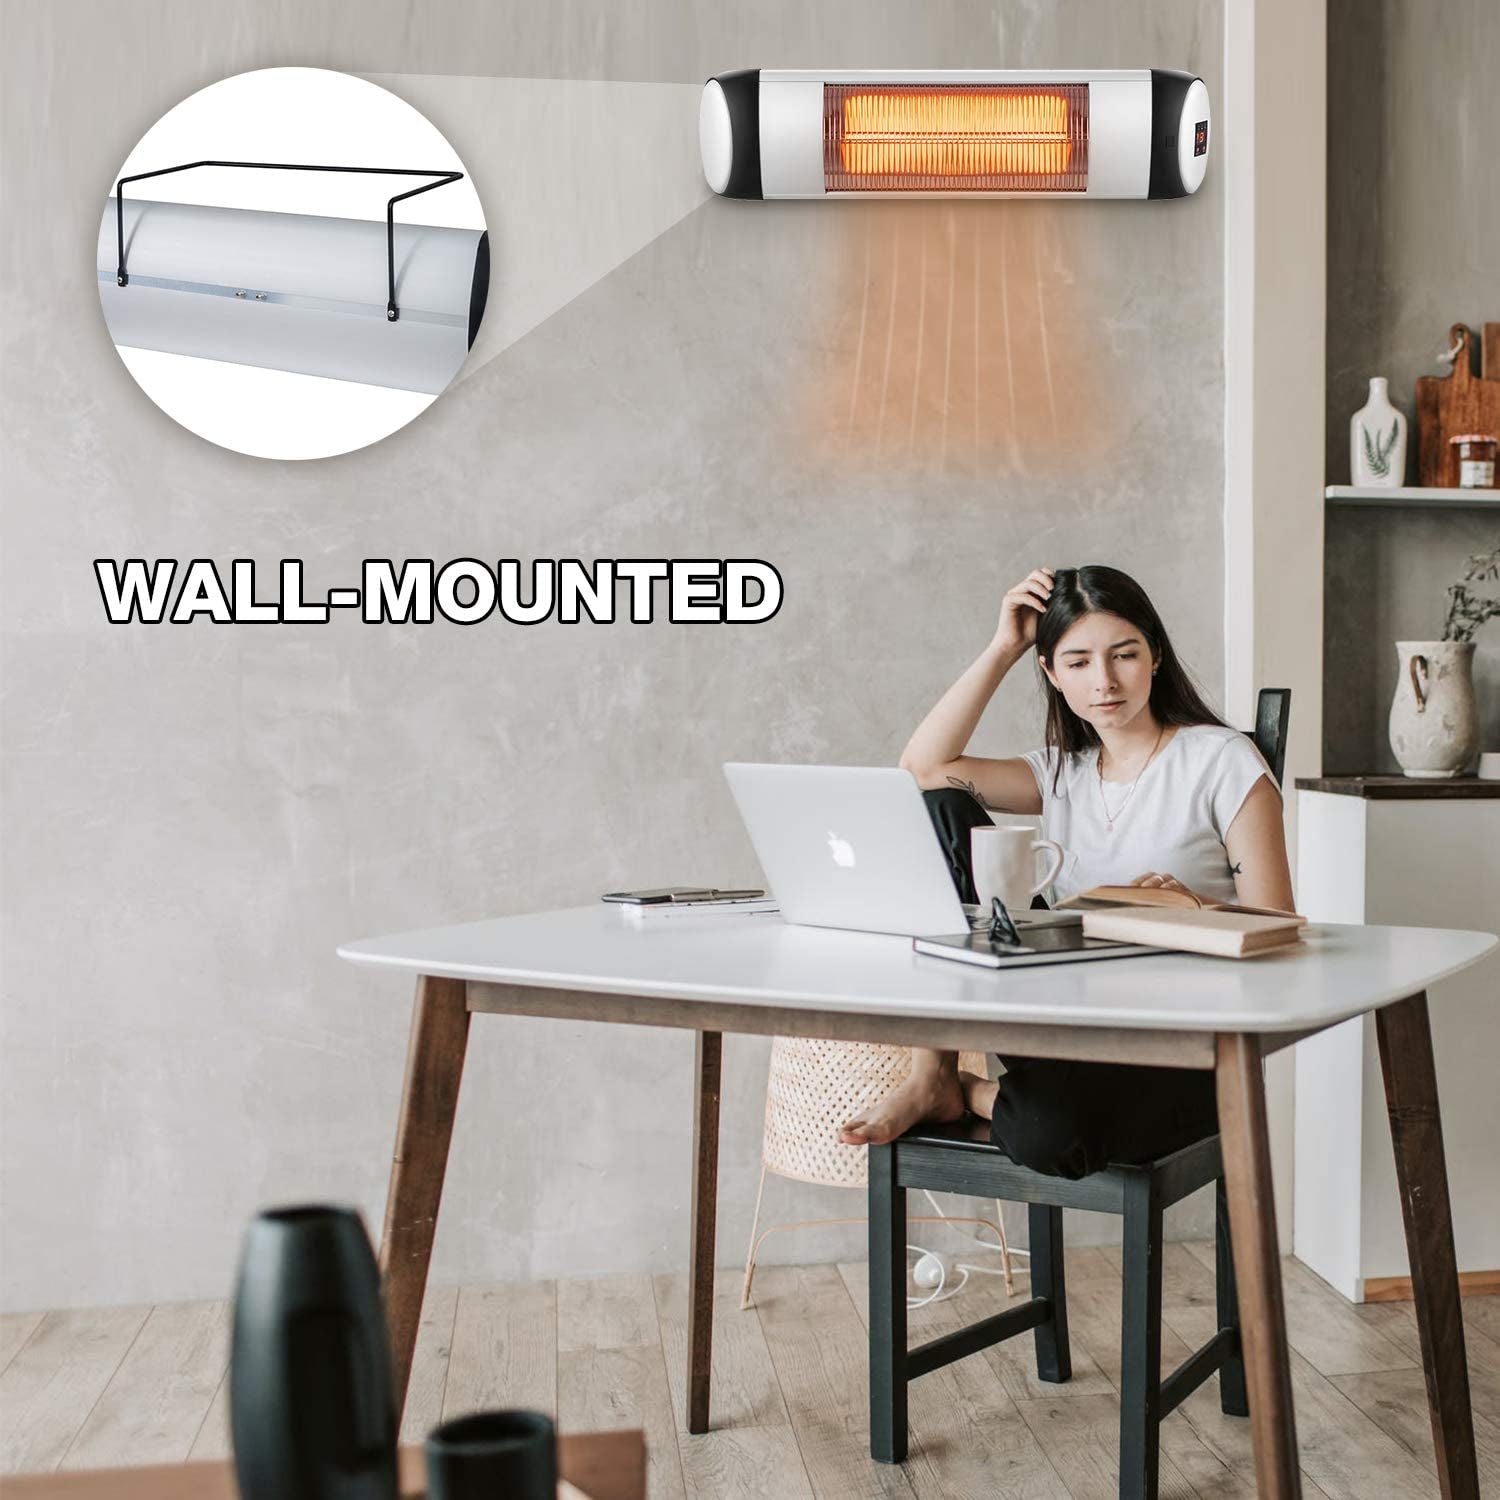 Electric Patio Heater Infrared Heater, Adjustable Standing/Outdoor Infrared Heater, Weather & Dust Proof, High Heat Efficiency, Waterproof IP65 Rated, Line Switch Control